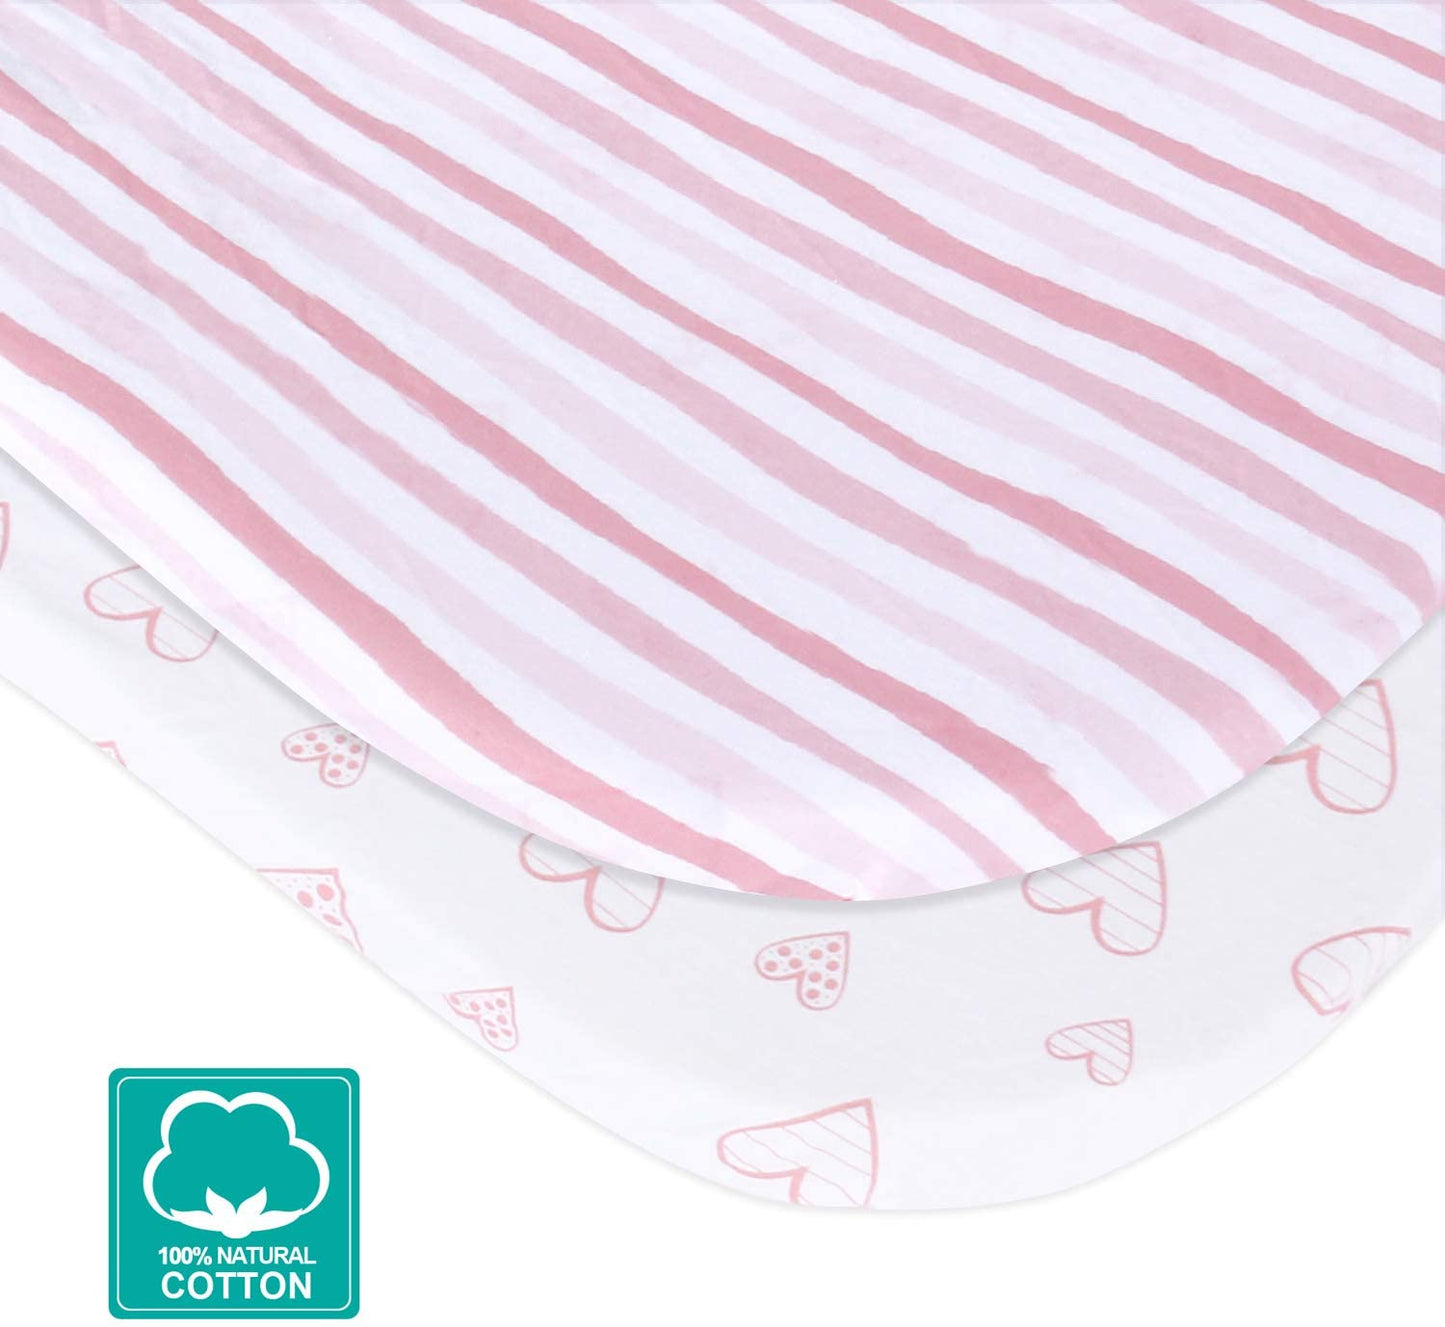 Shop by Brand/Model - Bassinet Sheet, 2 Pack, 100% Jersey Cotton, Pink & White